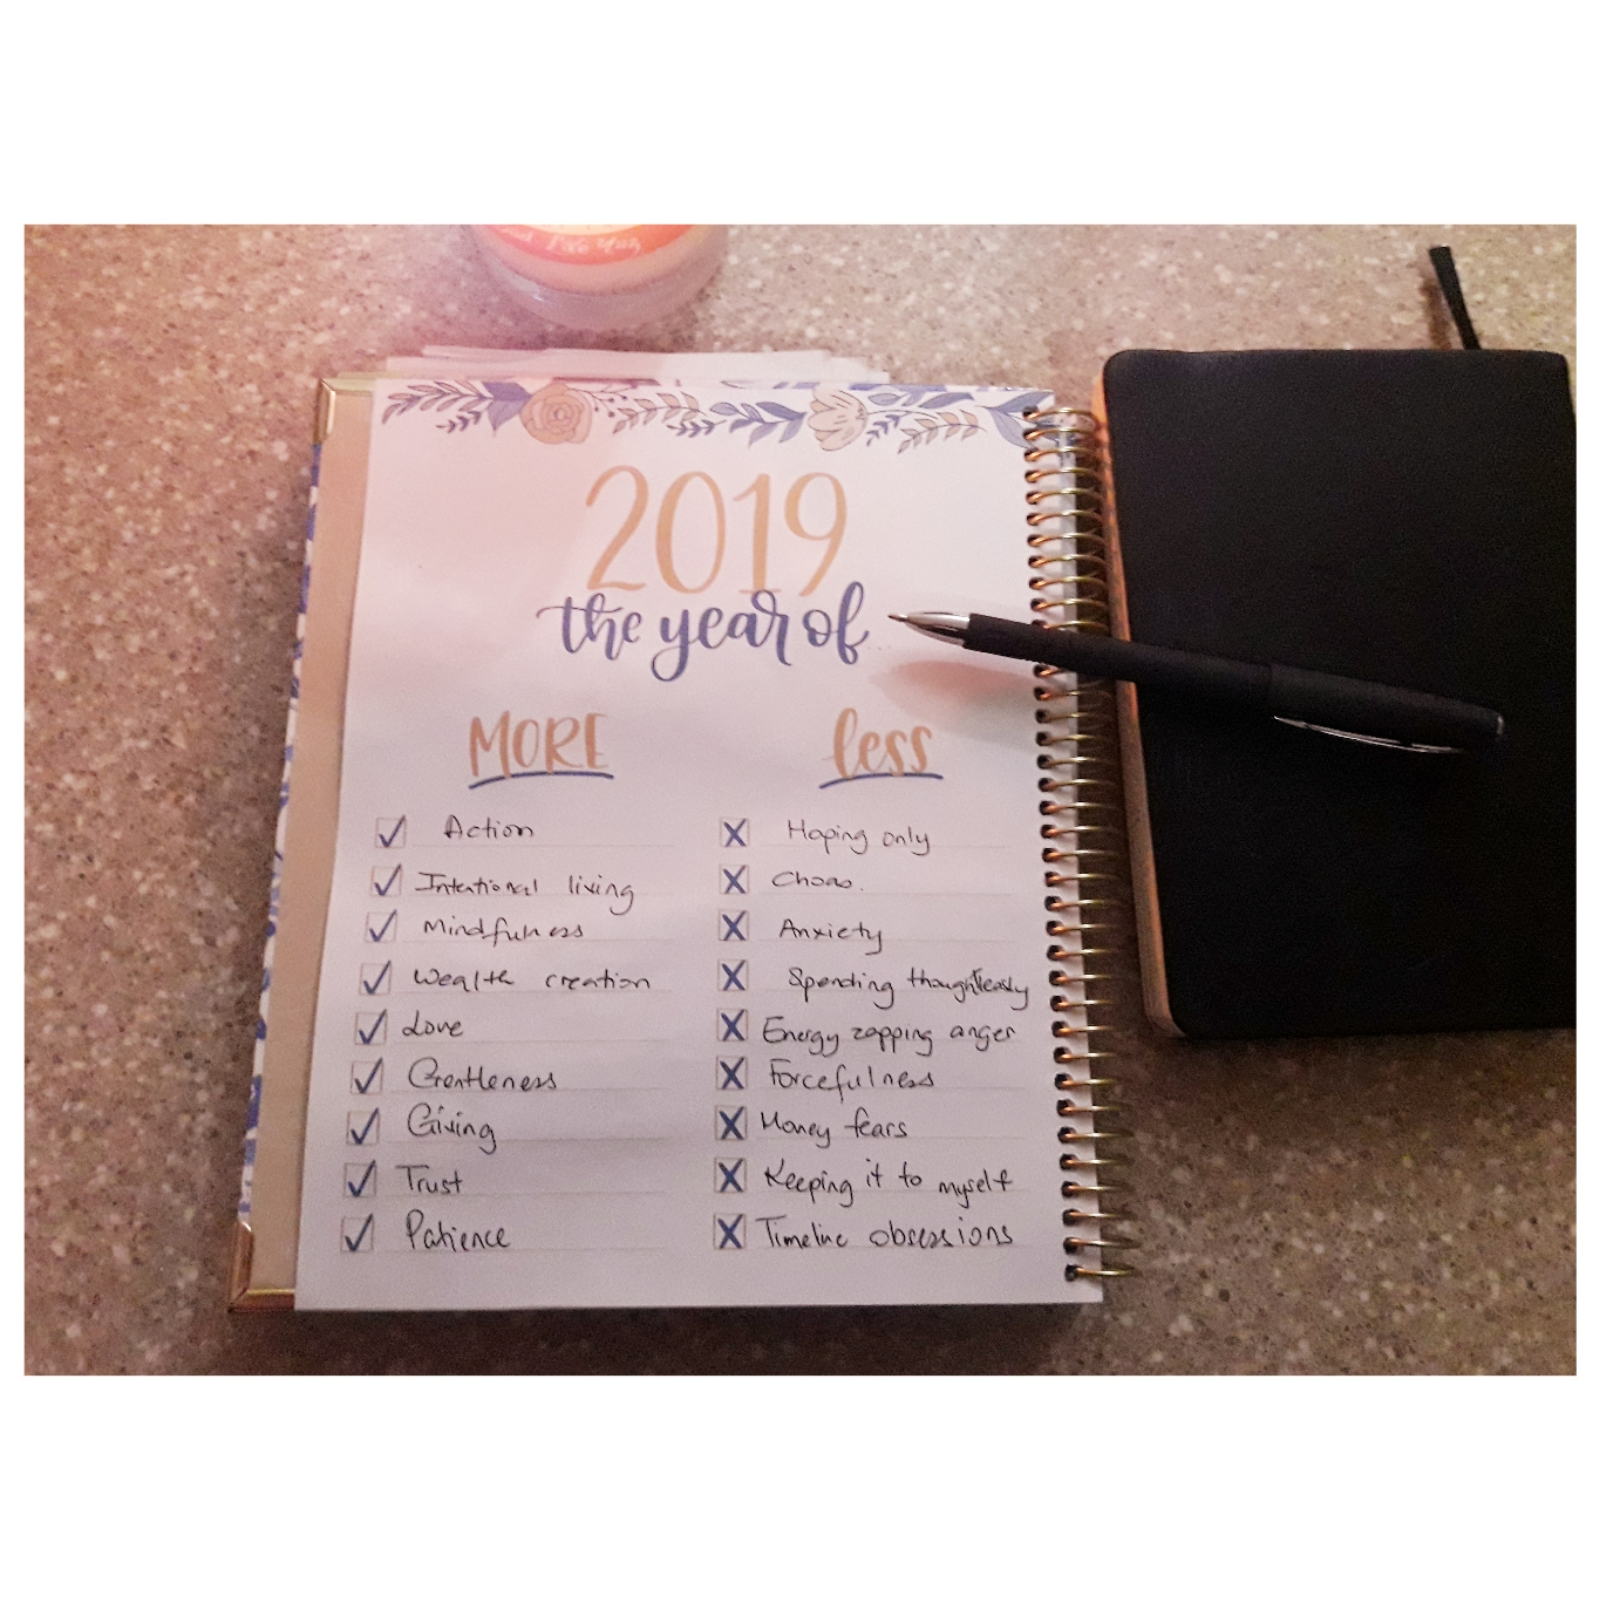 bloom daily vision planner - 2019 year of spread - Chantel DaCosta